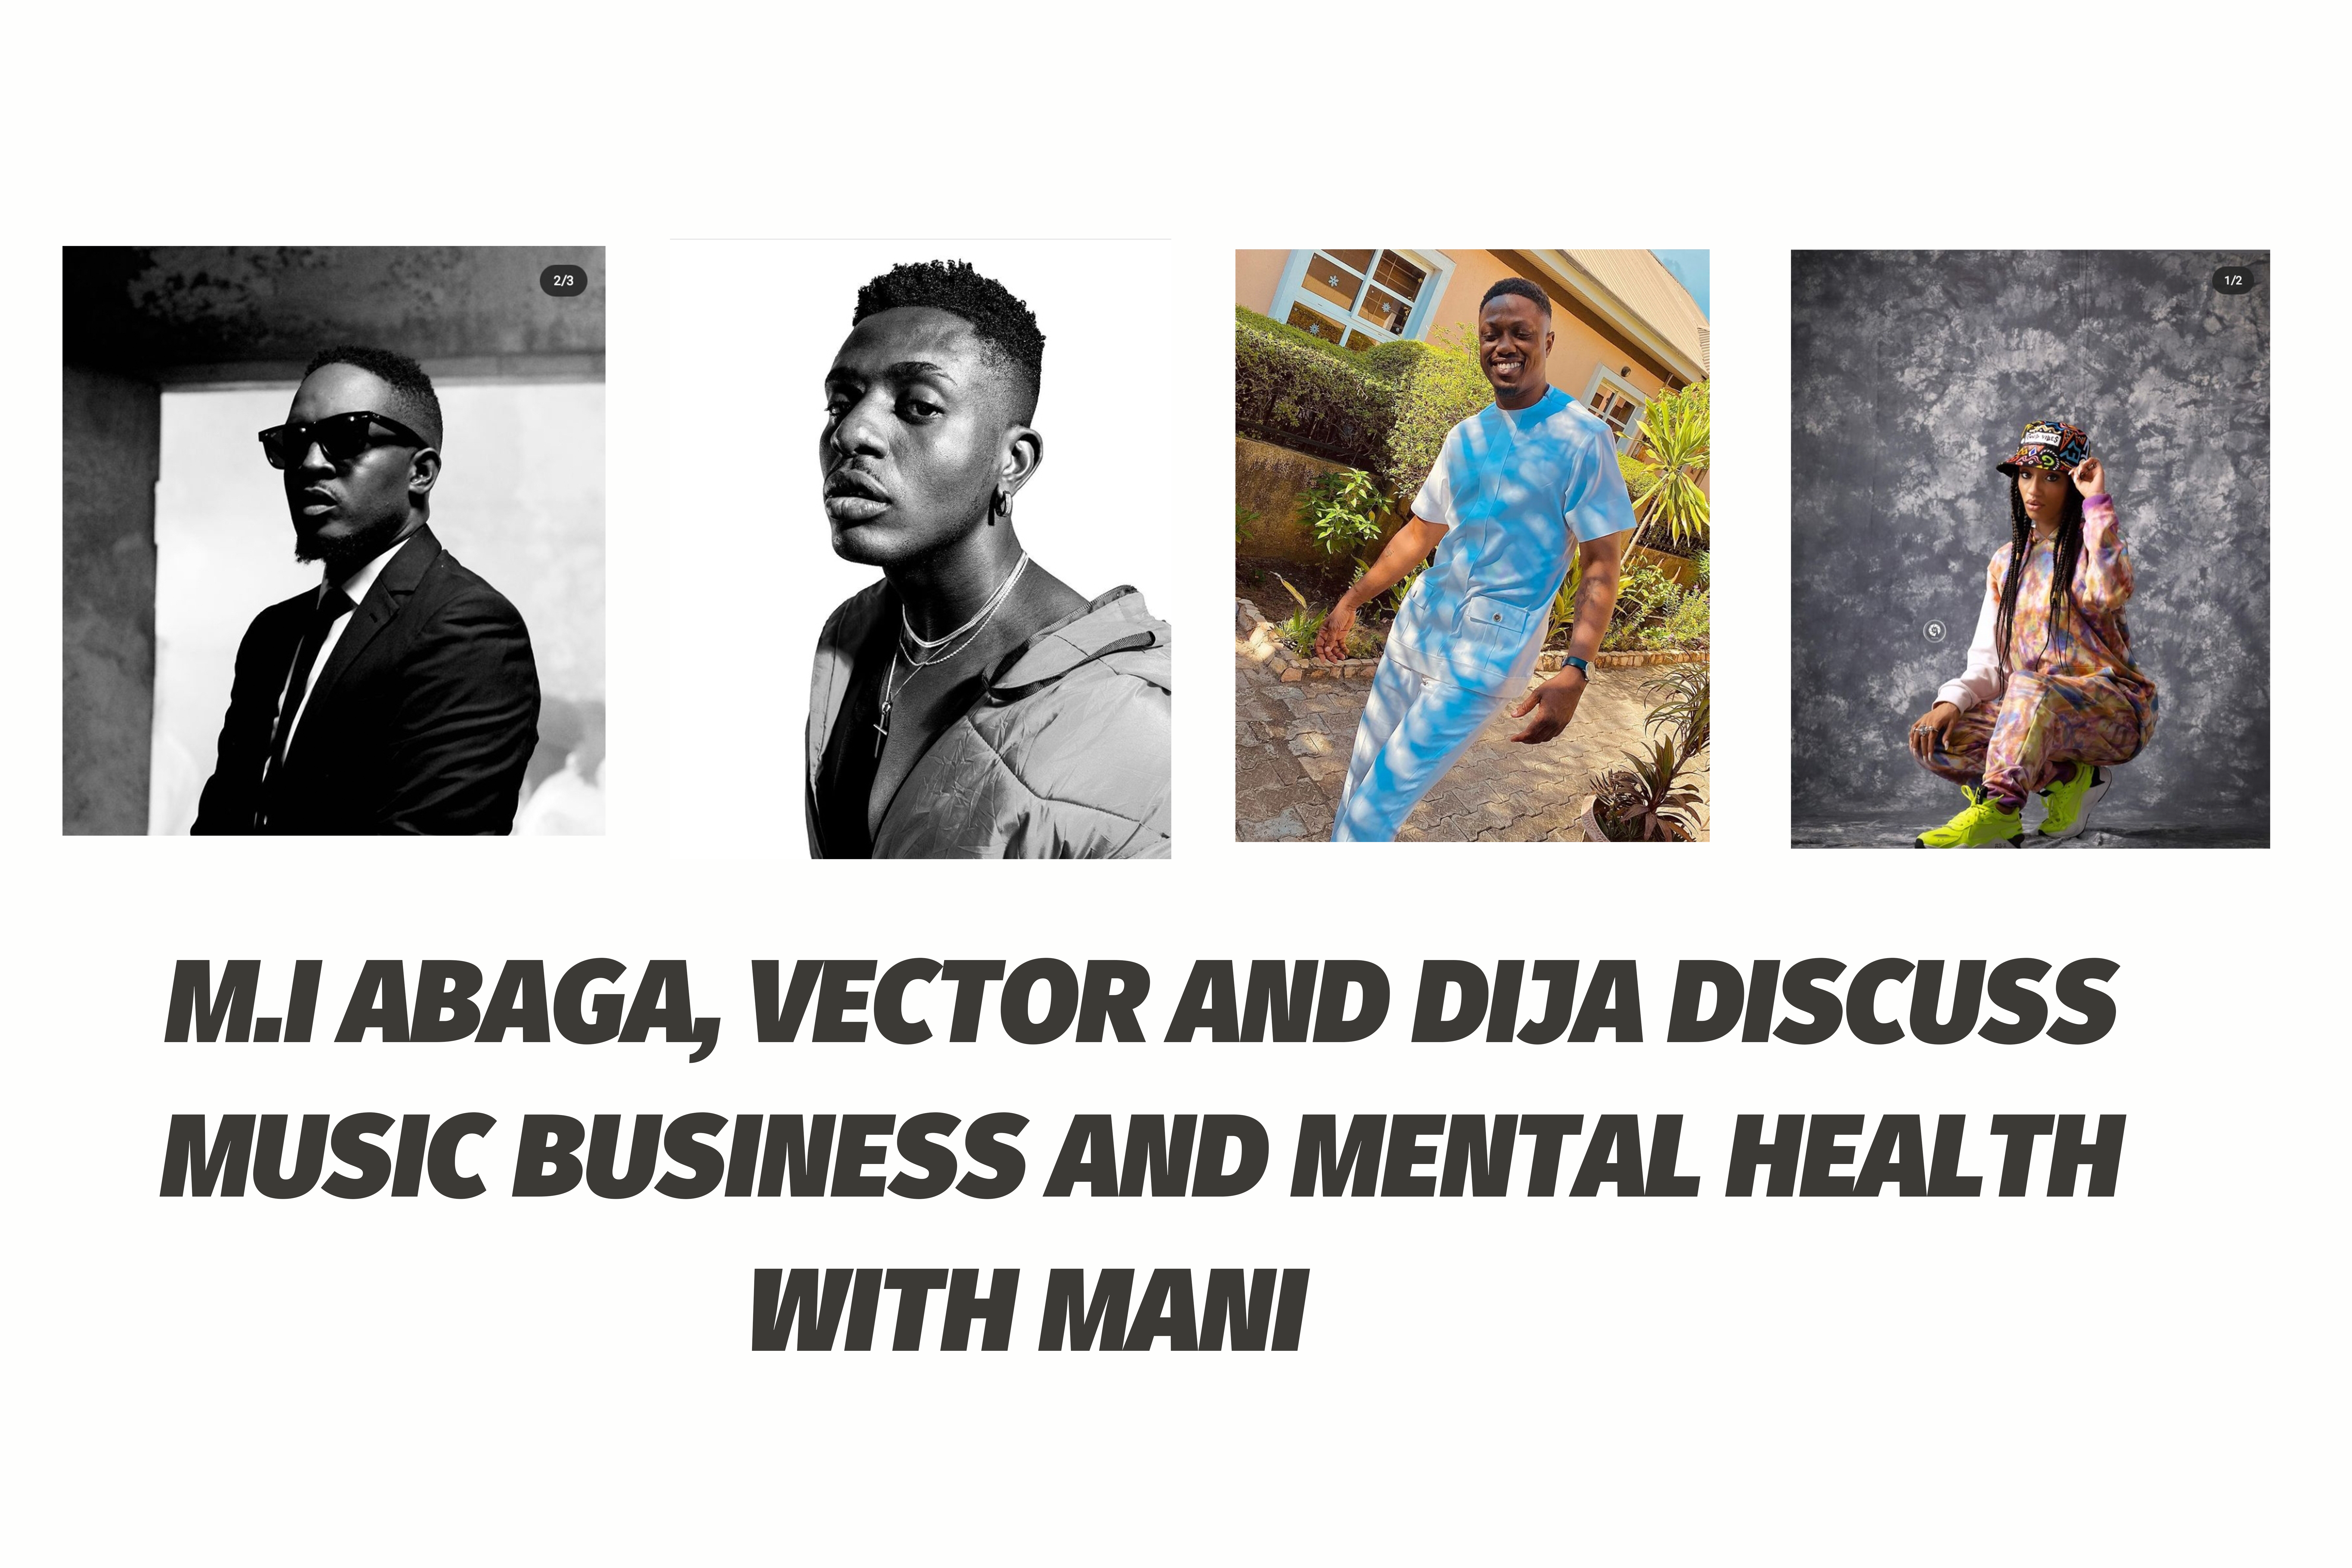 M.I ABAGA, VECTOR AND DIJA DISCUSS MUSIC BUSINESS AND MENTAL HEALTH WITH MANI - Music Wormcity